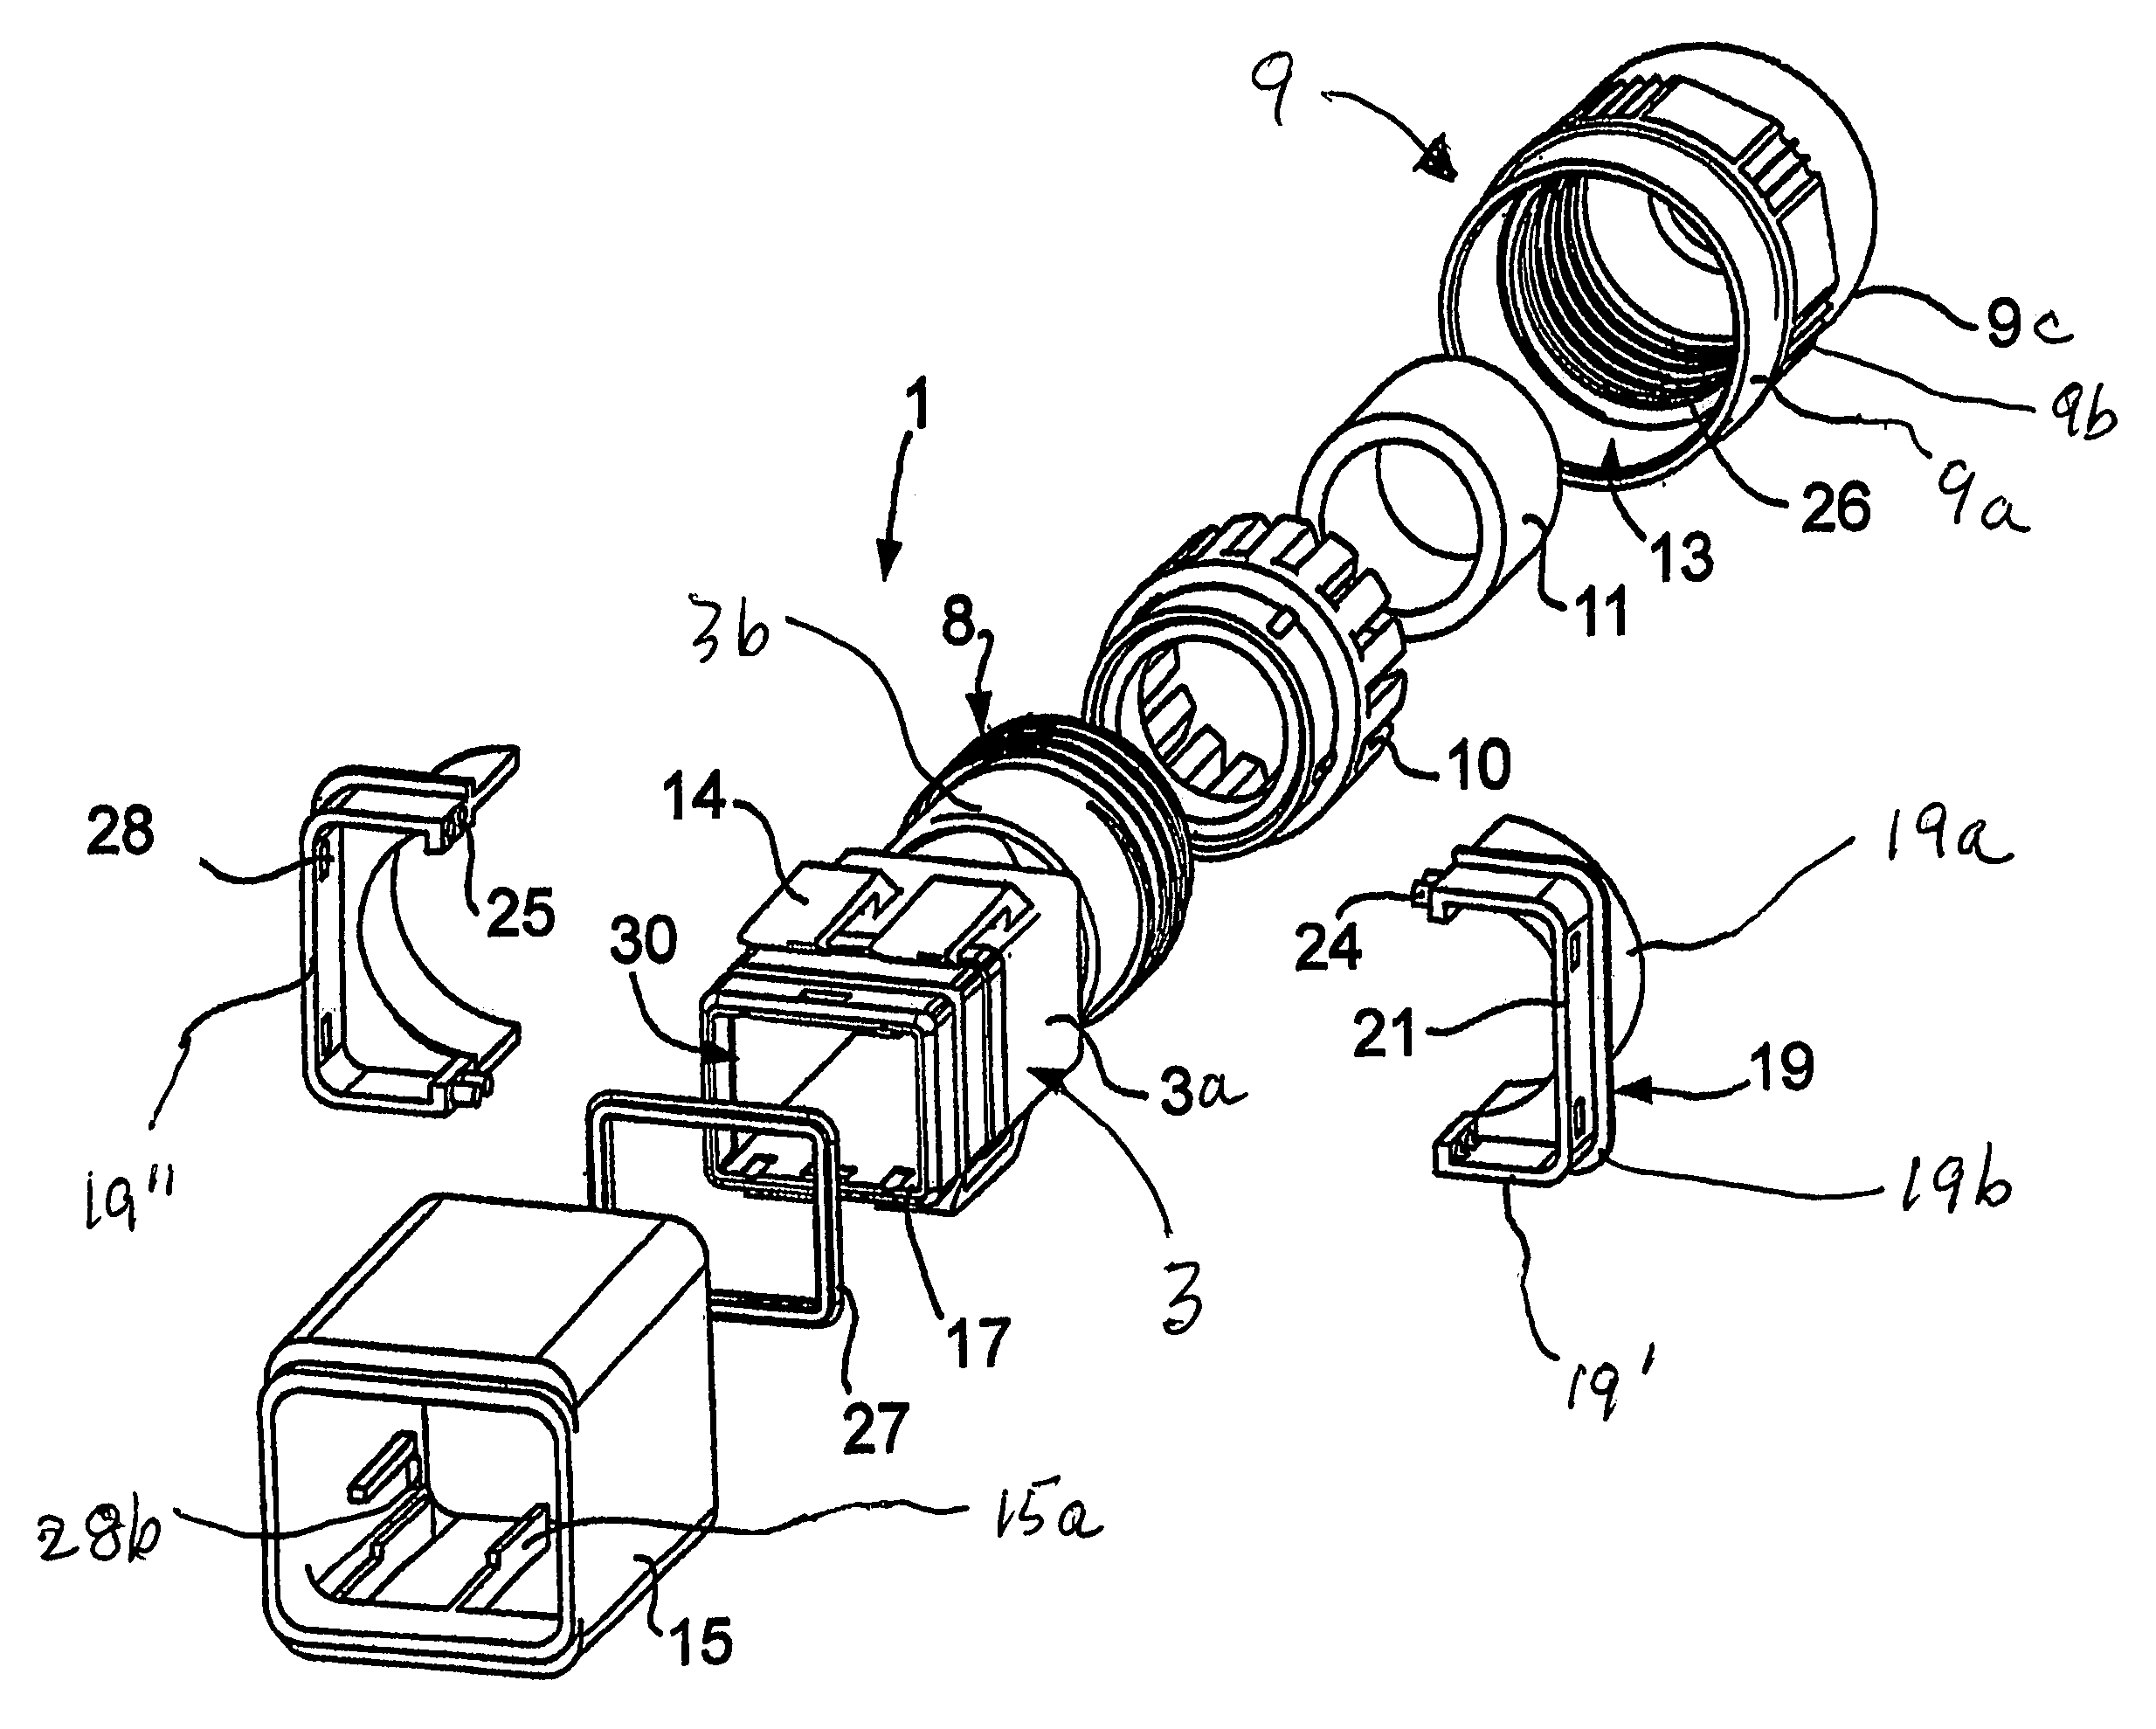 Adapter for attaching an insertion device to a cable fitting